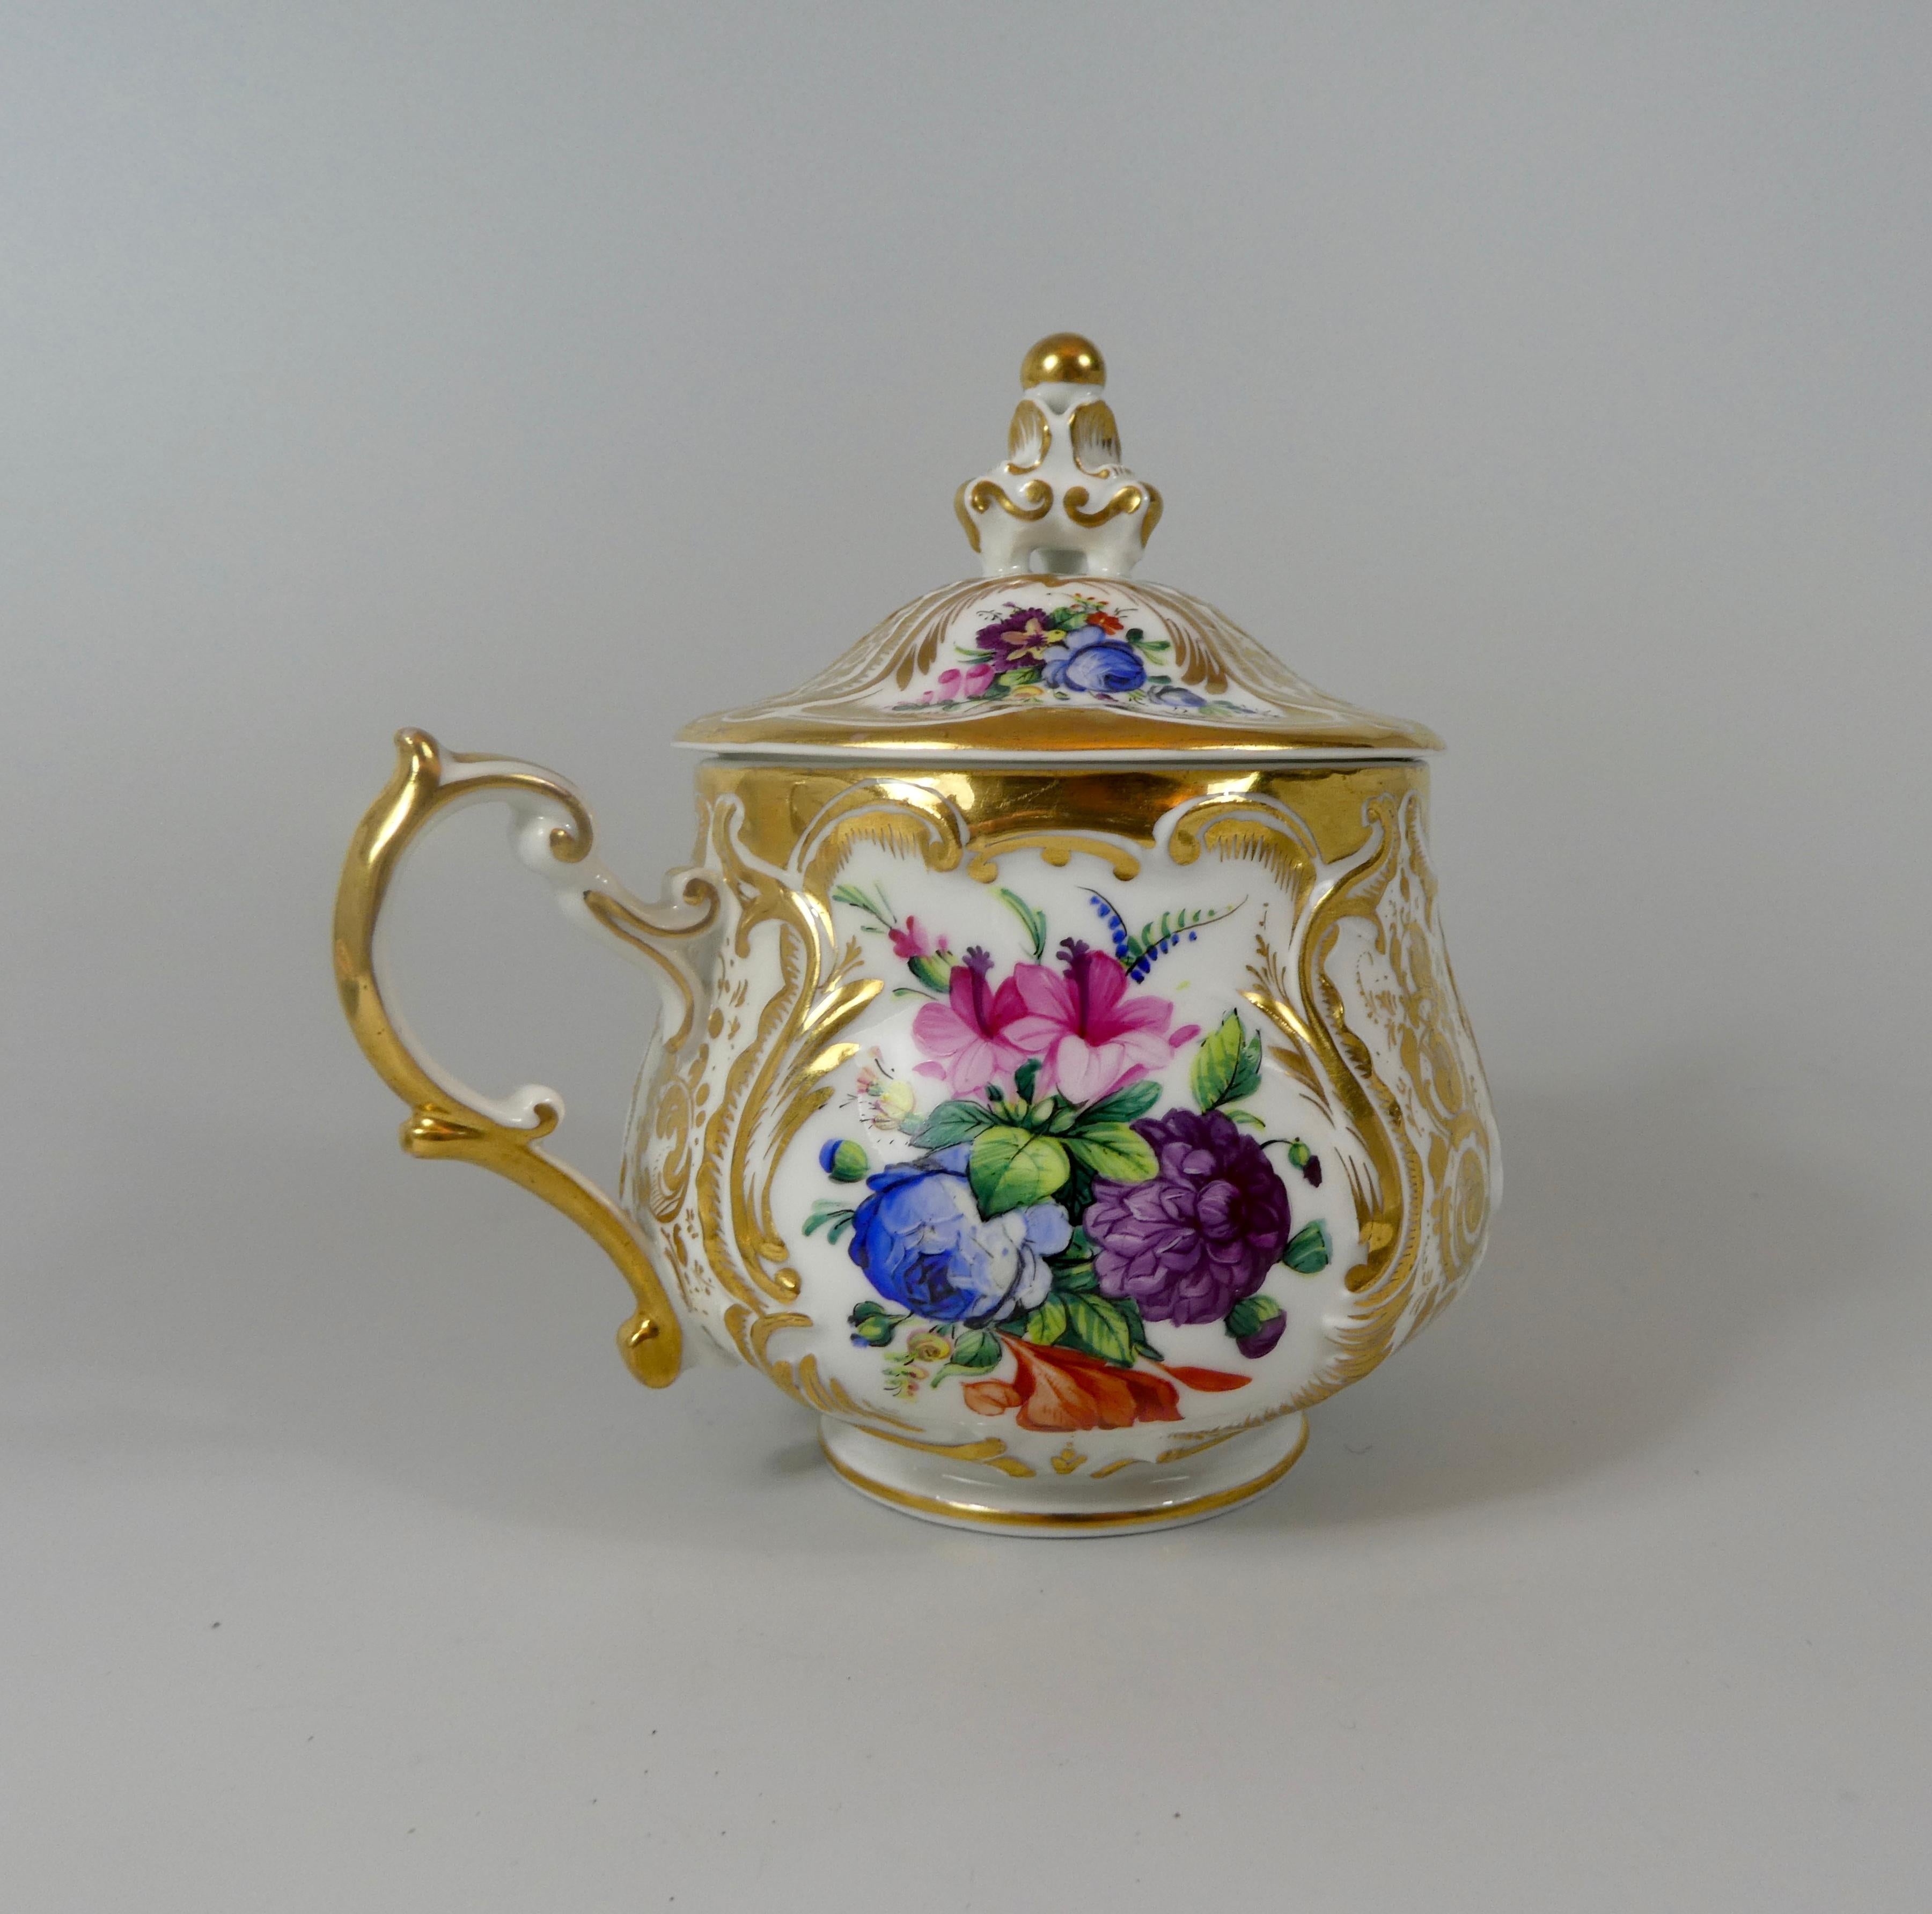 KPM Berlin Porcelain Chocolate Cup, Cover and Stand, circa 1860 2